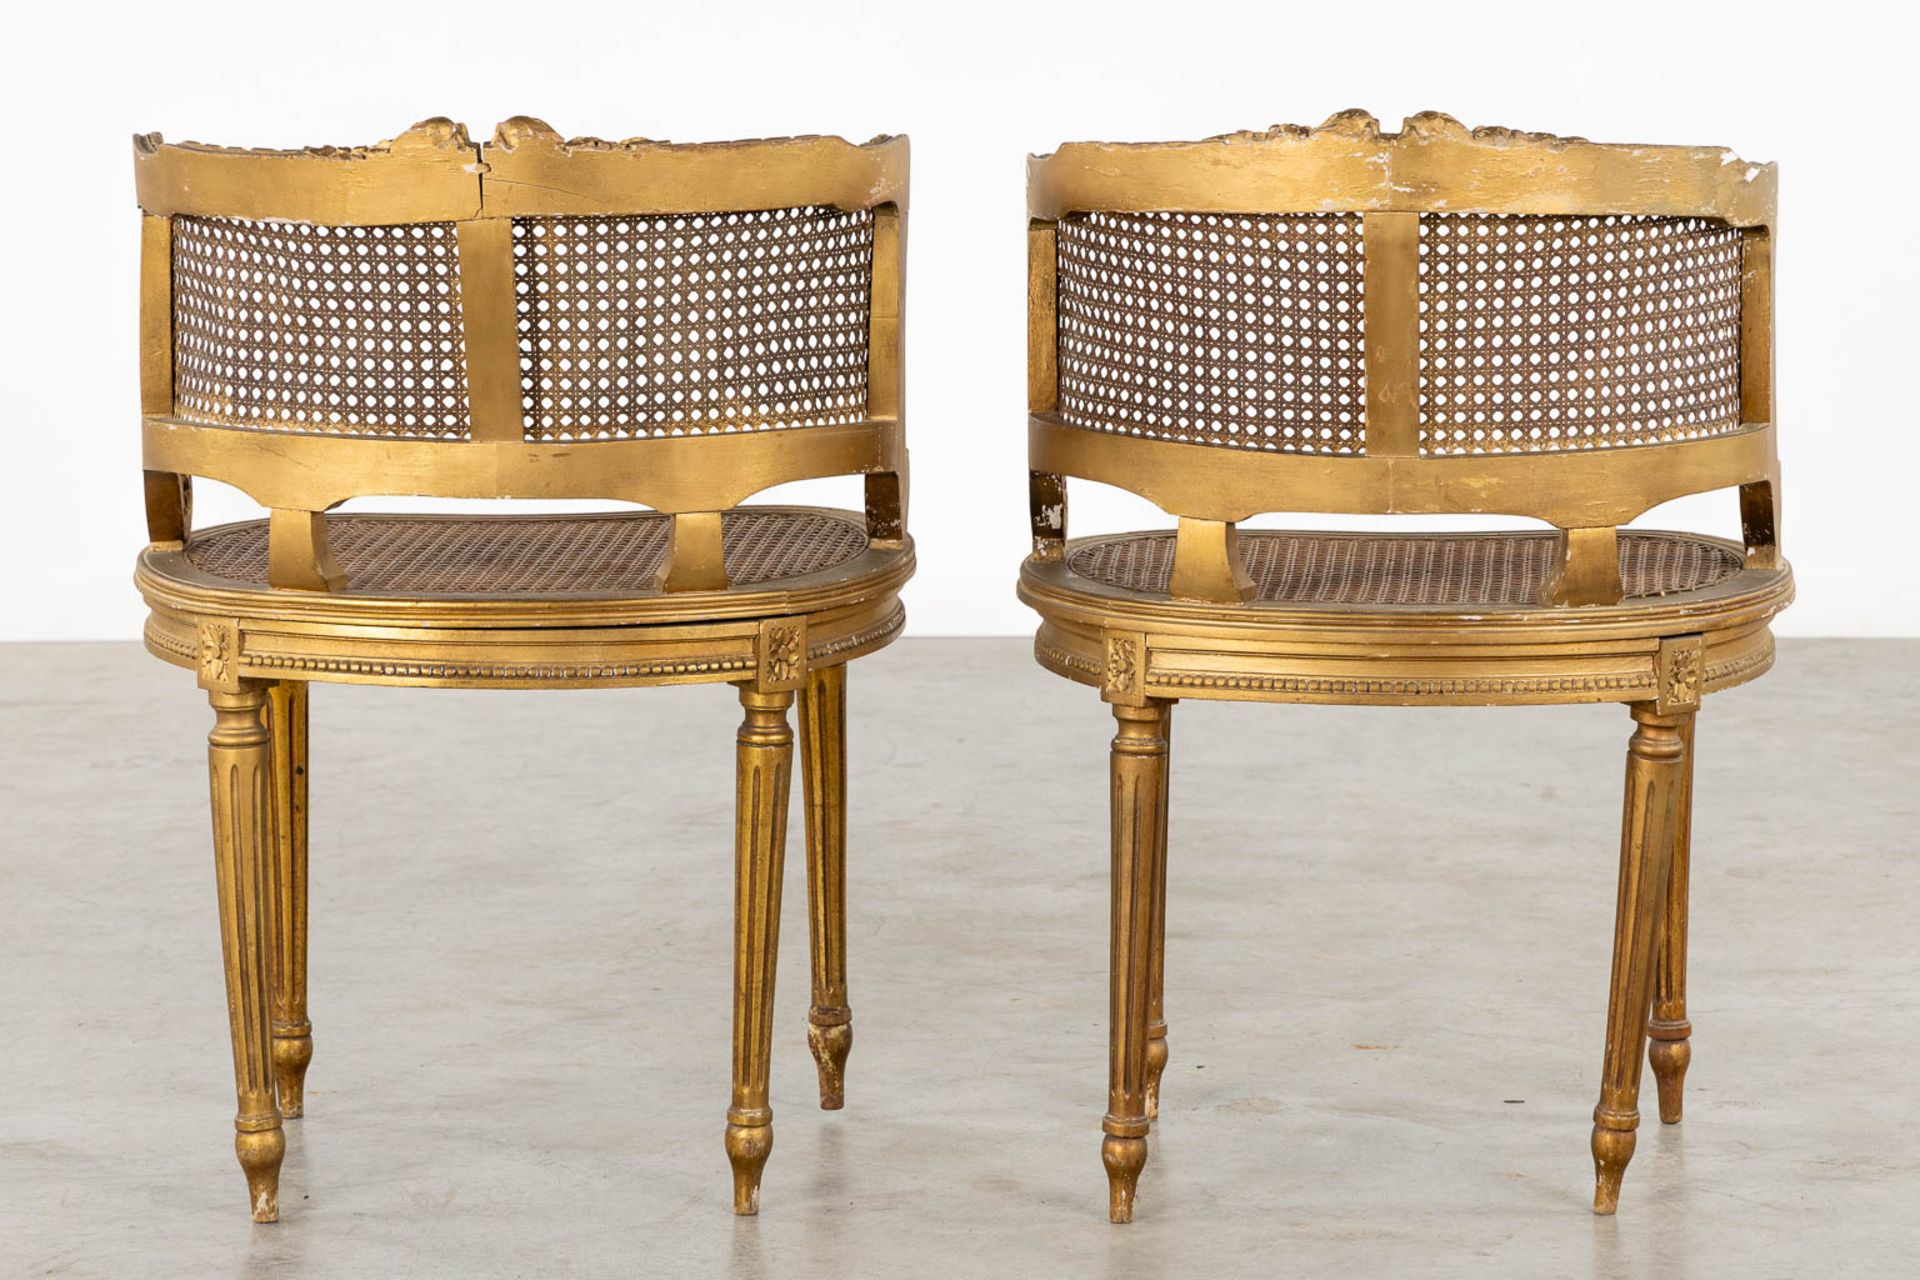 Two side tables, Two chairs, sculptured wood in Louis XVI style. Circa 1900. (L:57 x W:81 x H:75 cm) - Bild 13 aus 18